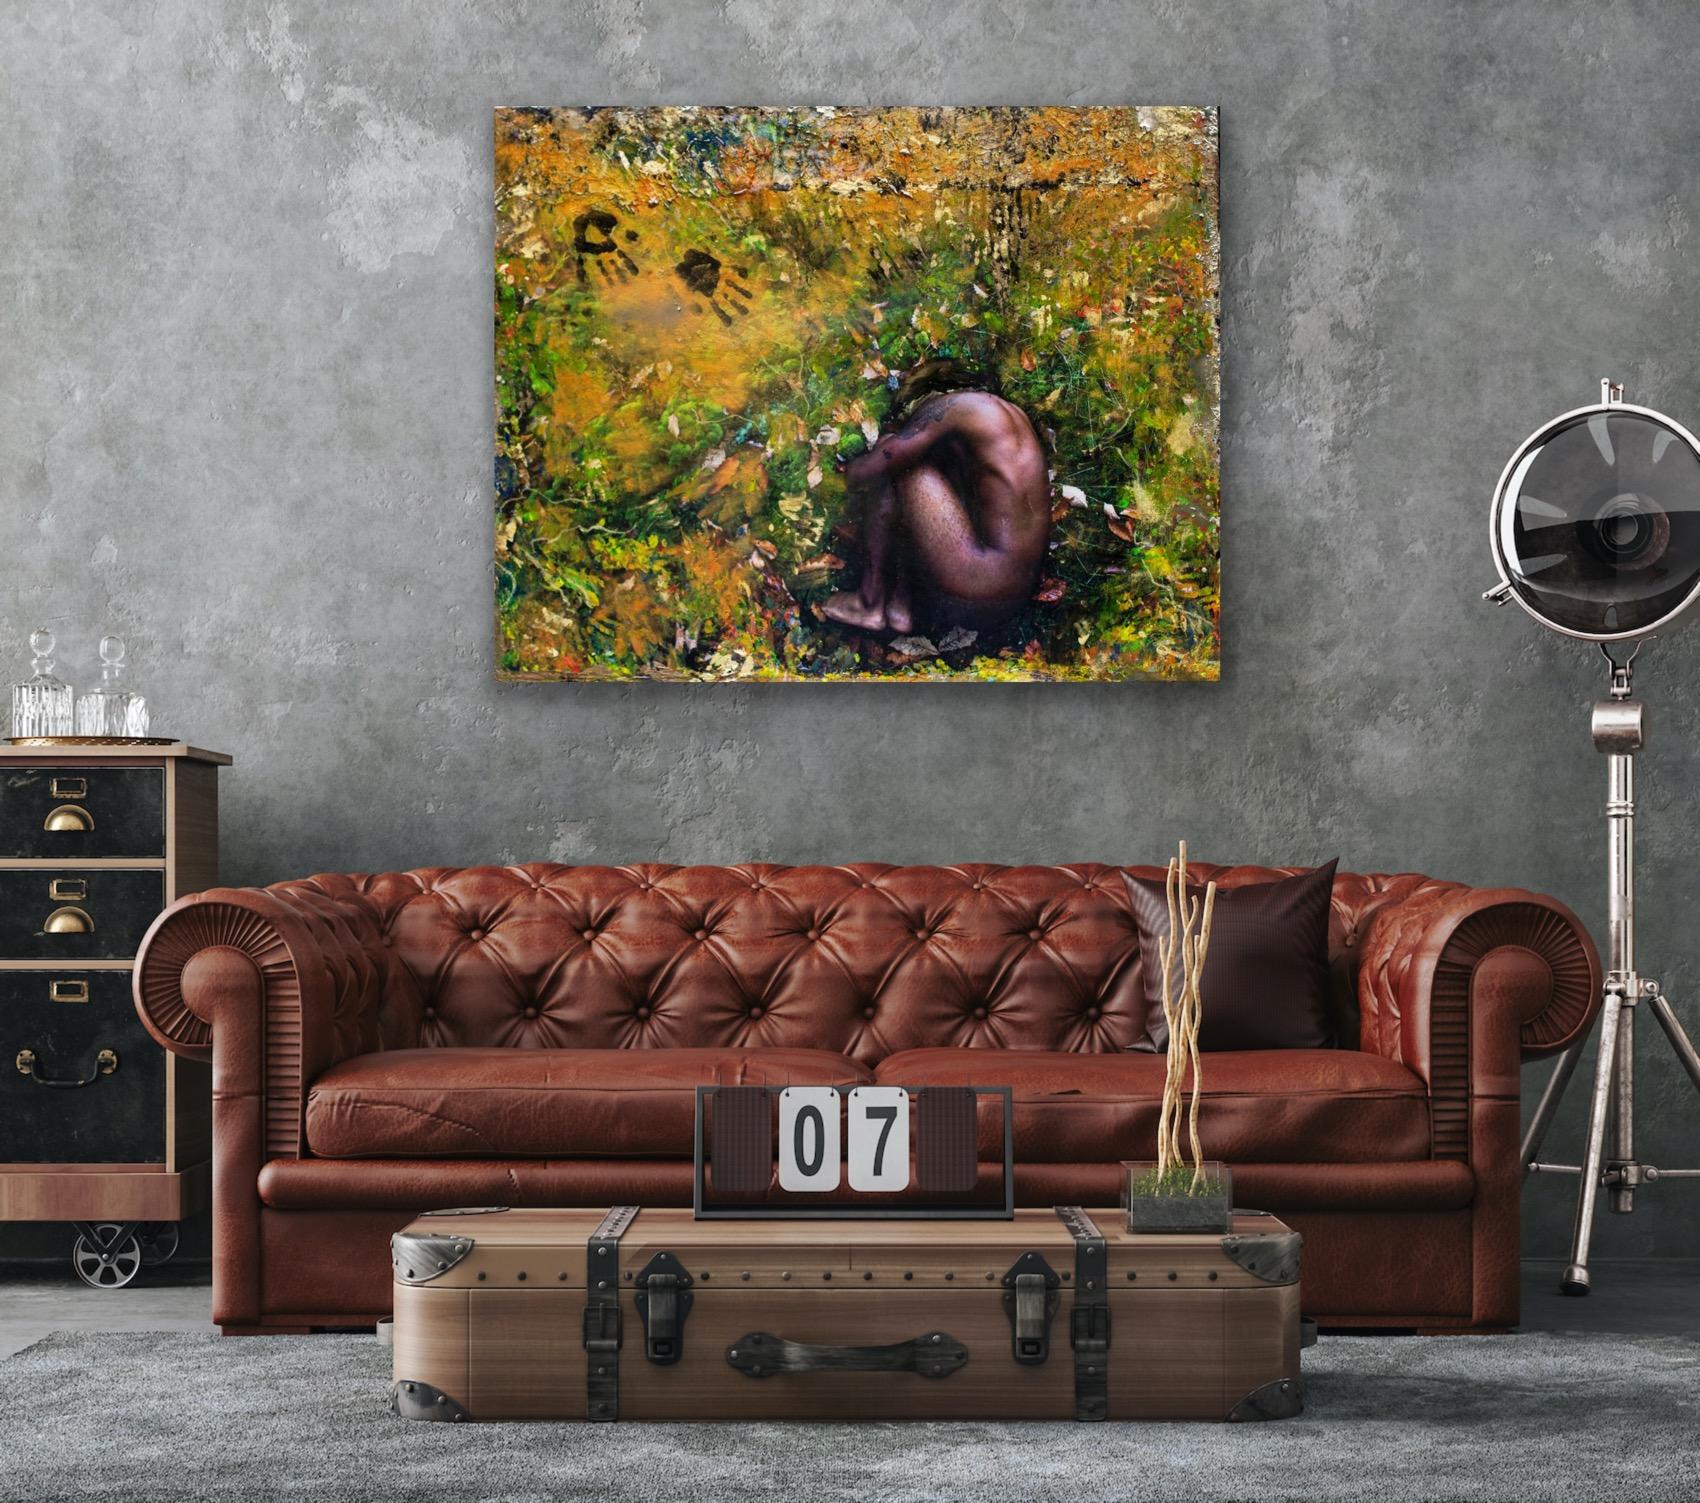 Nirvana is a digital photograph on canvas, coated in paint and resin. The figure in the image is in fetal position, contrasting societal assumptions of the black male that is typically portrayed as large, confident, aggressive and dominant. The